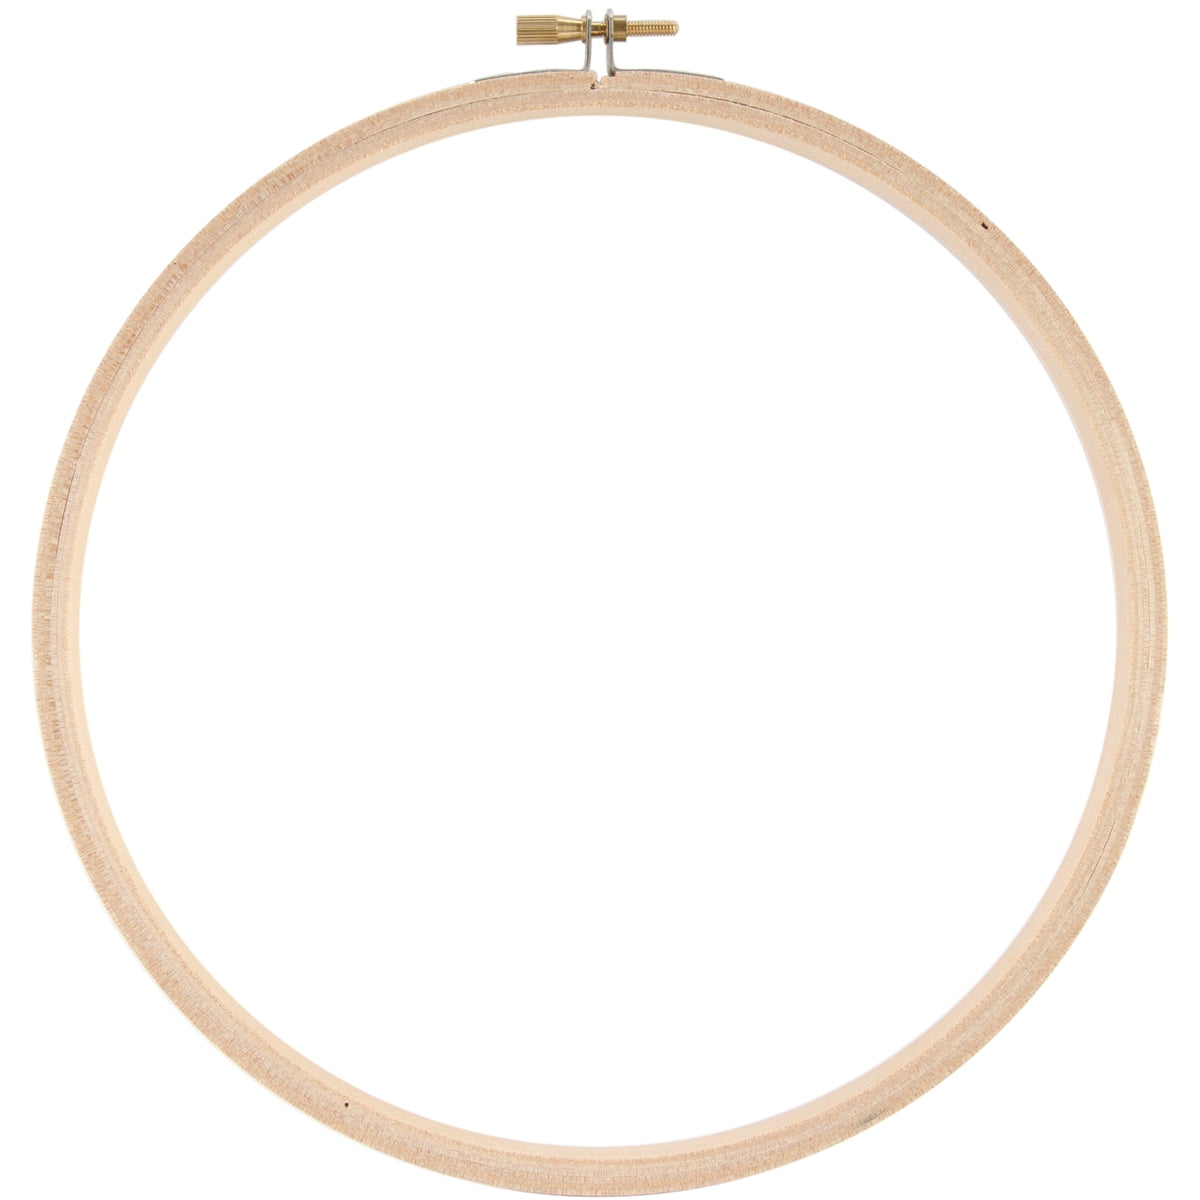 Square Wood Embroidery Hoop - 8